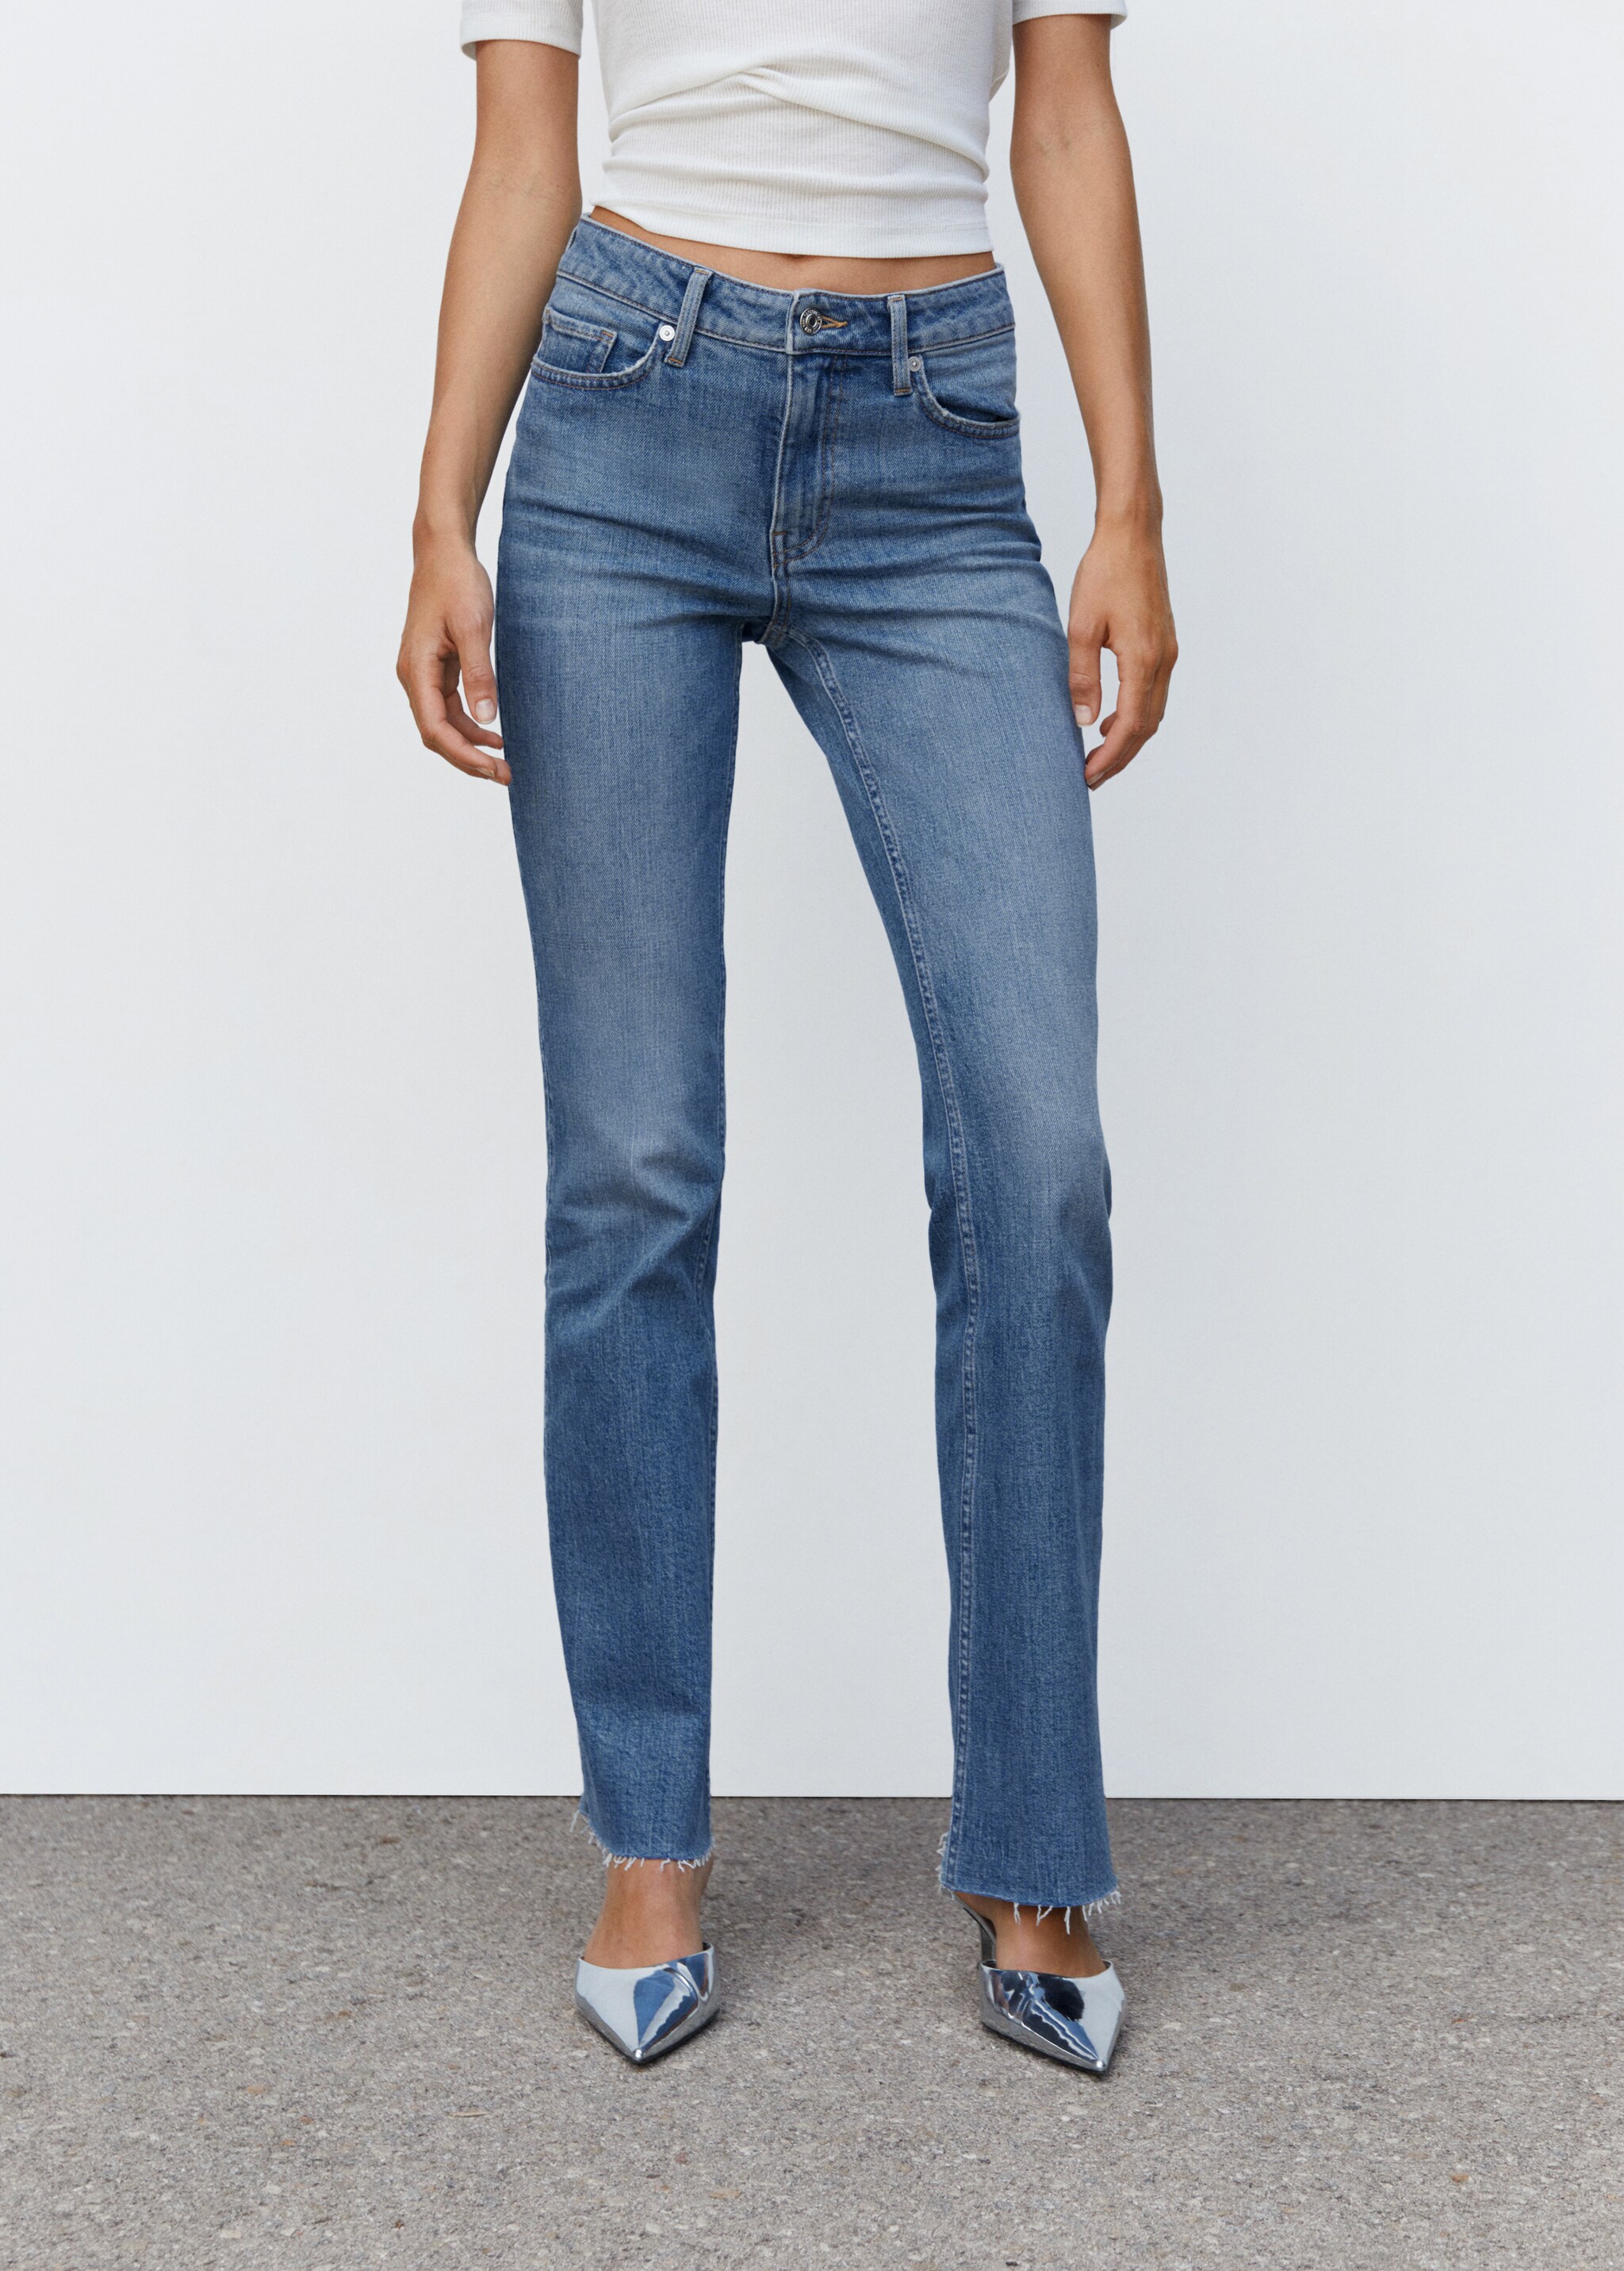 Jeans flare taille normale - Plan moyen